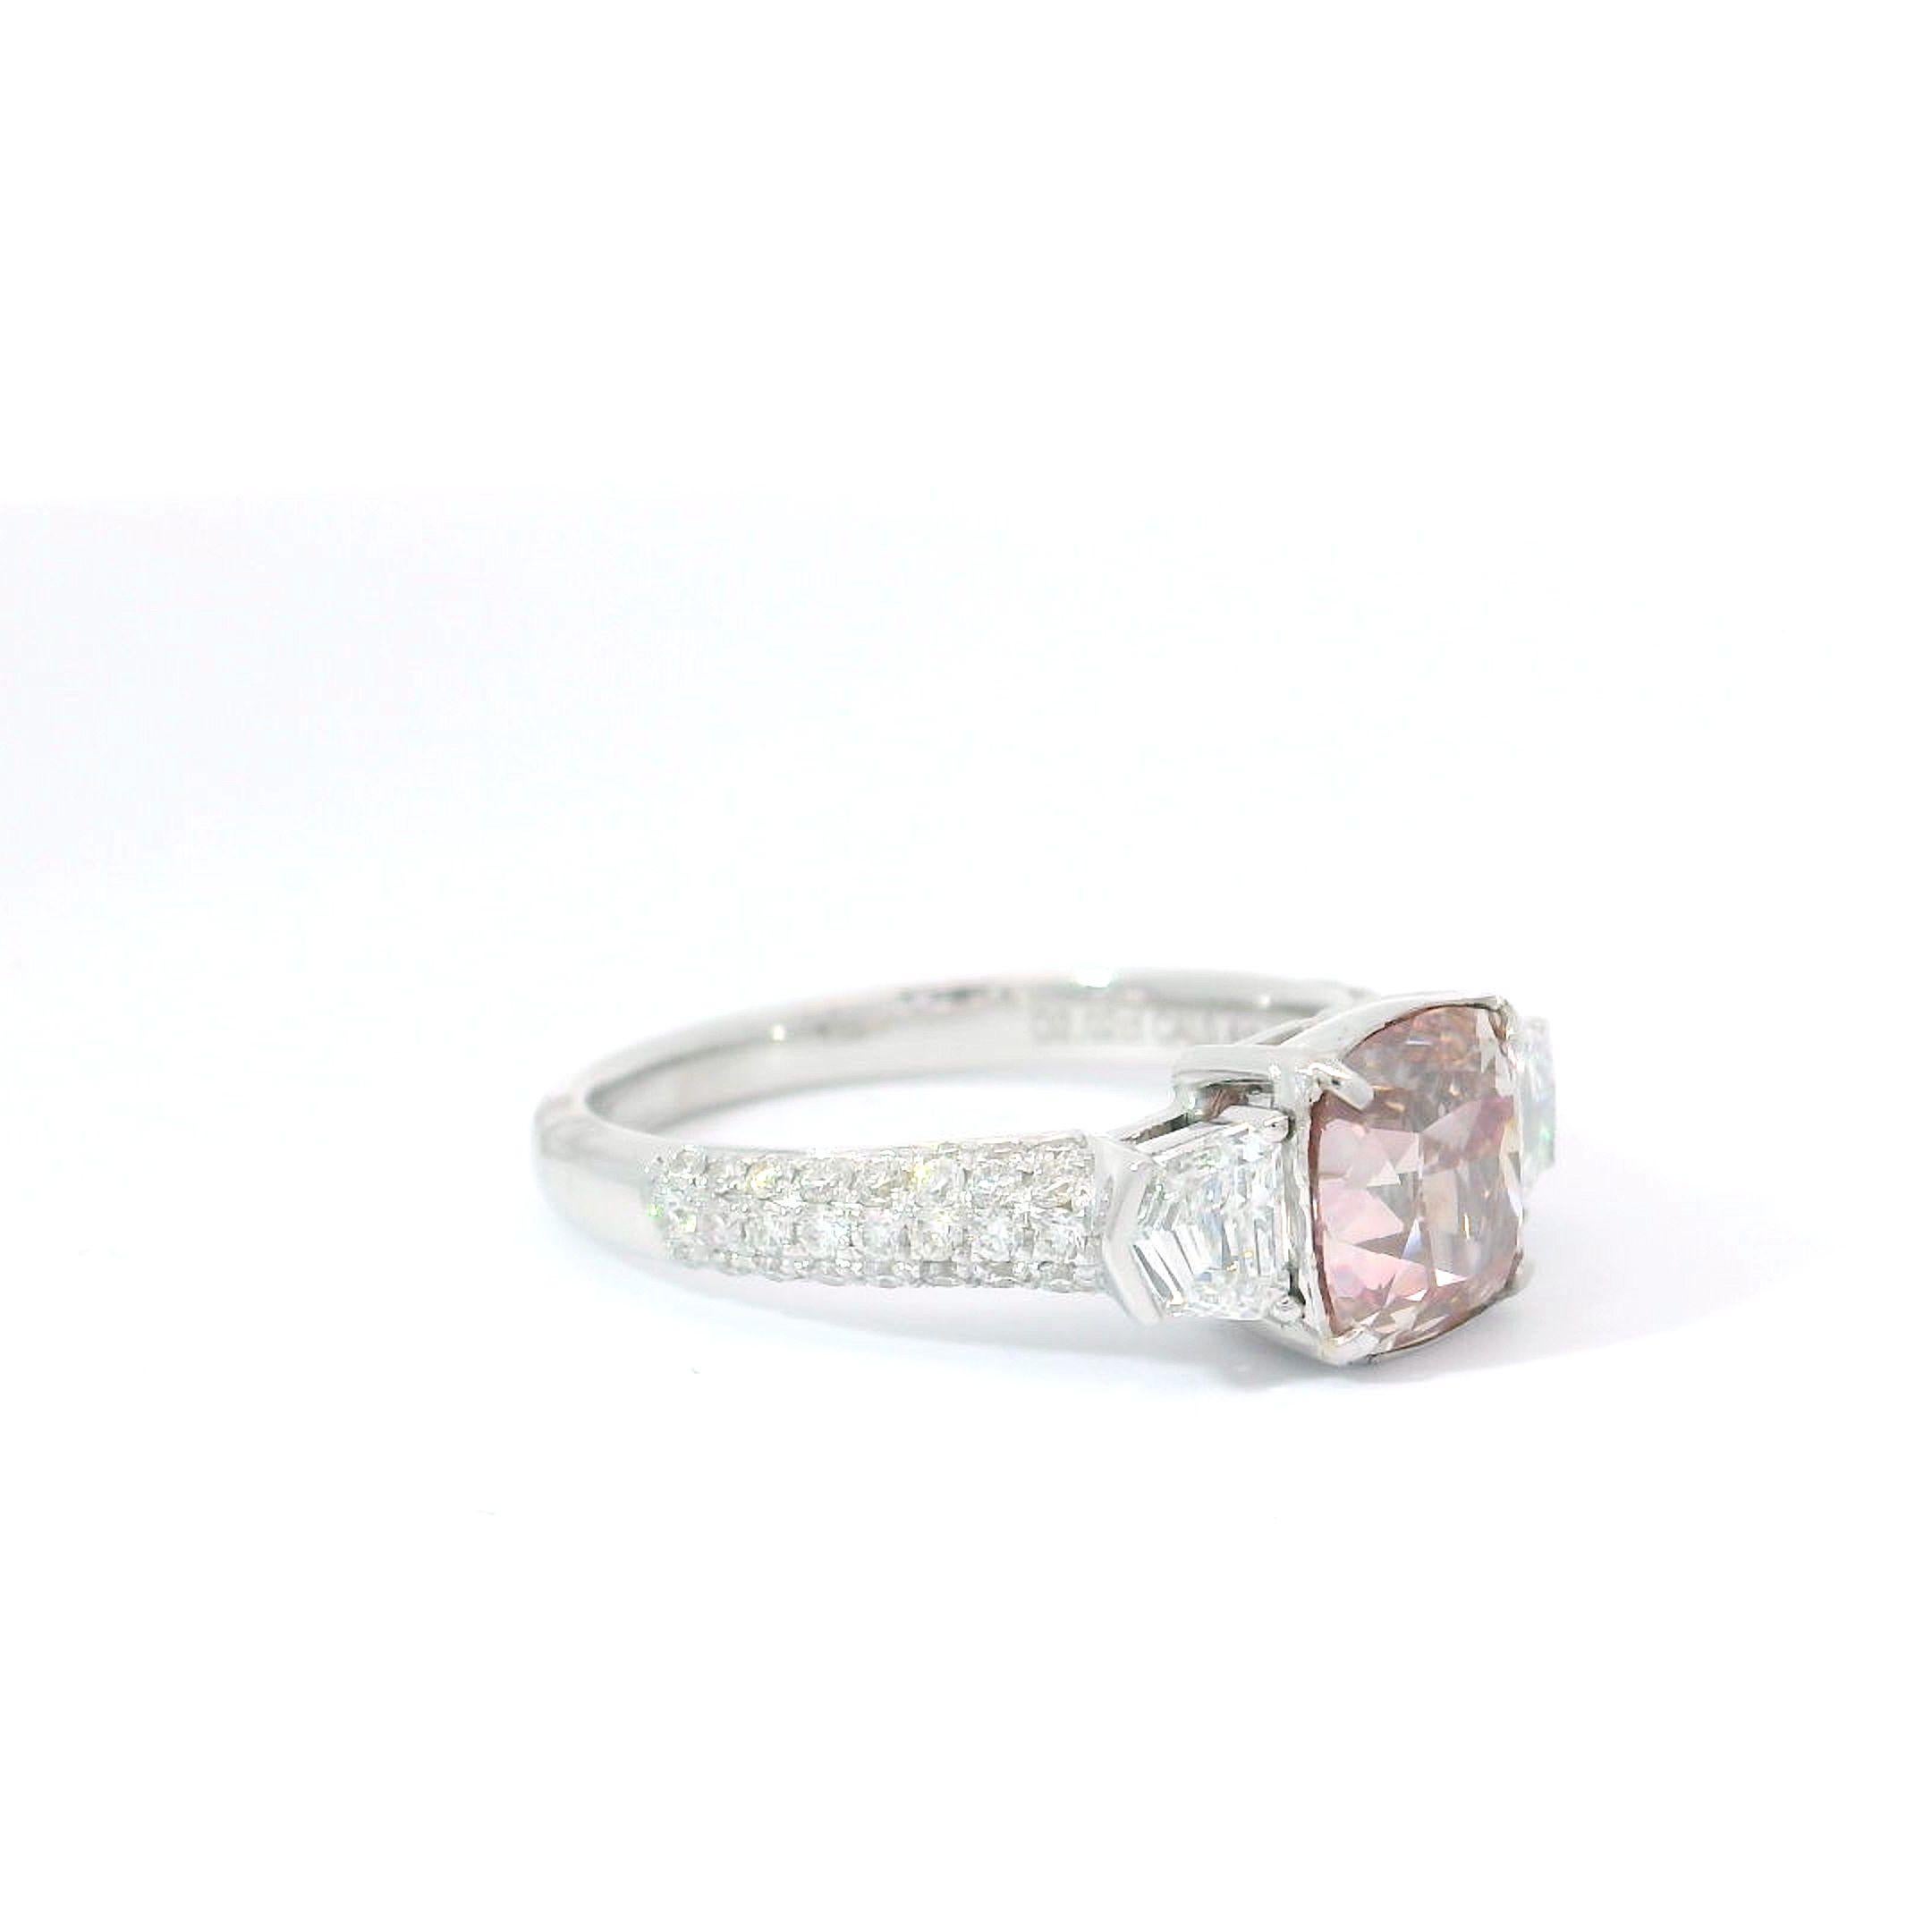 Cushion Cut 2.01 Carat Fancy Light Brownish Pink Diamond Ring VS Clarity AGL Certified For Sale